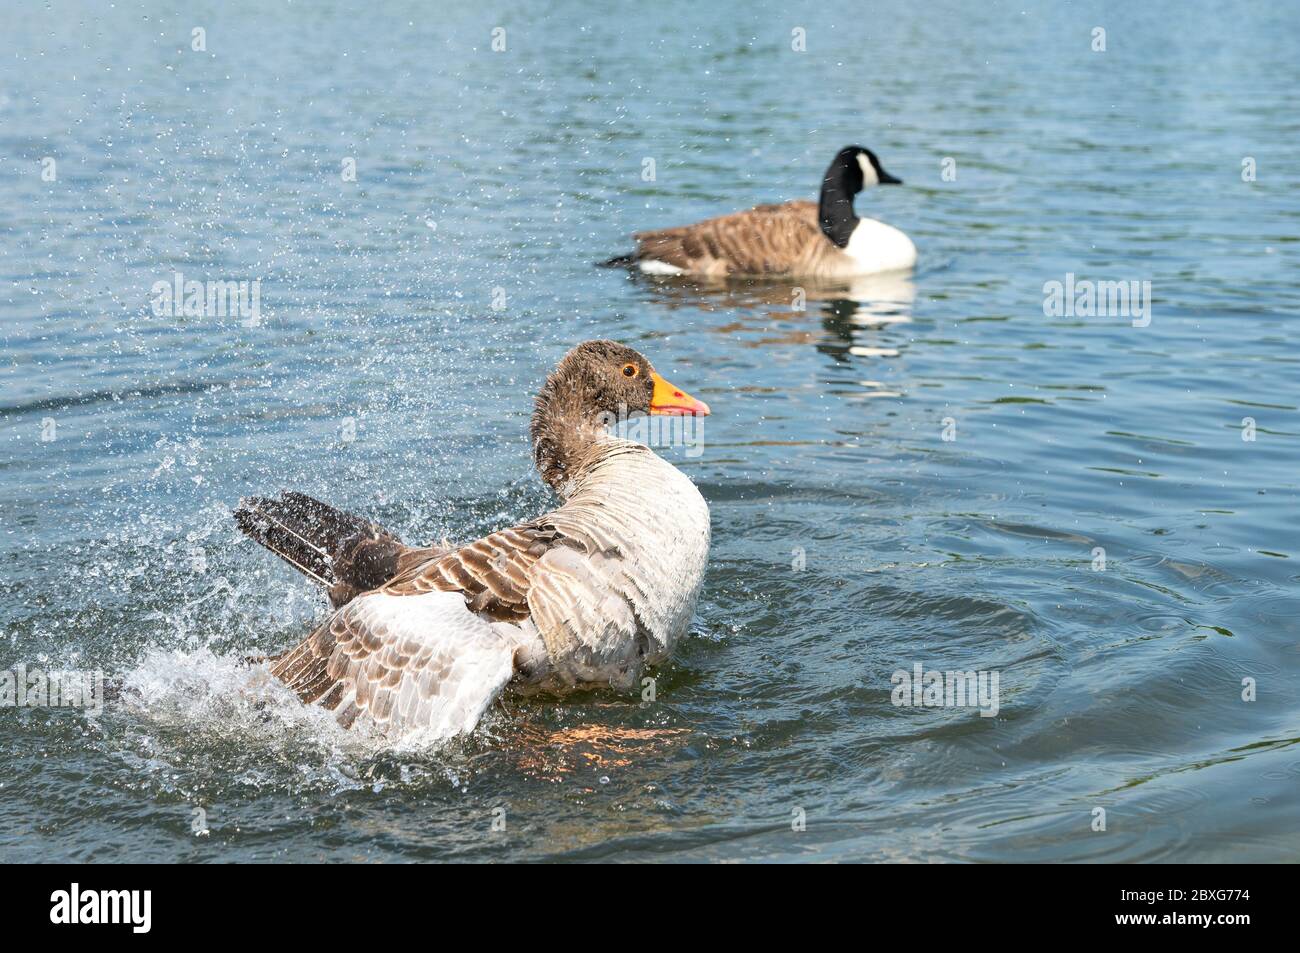 The greylag goose splashing its wings in the water. Stock Photo